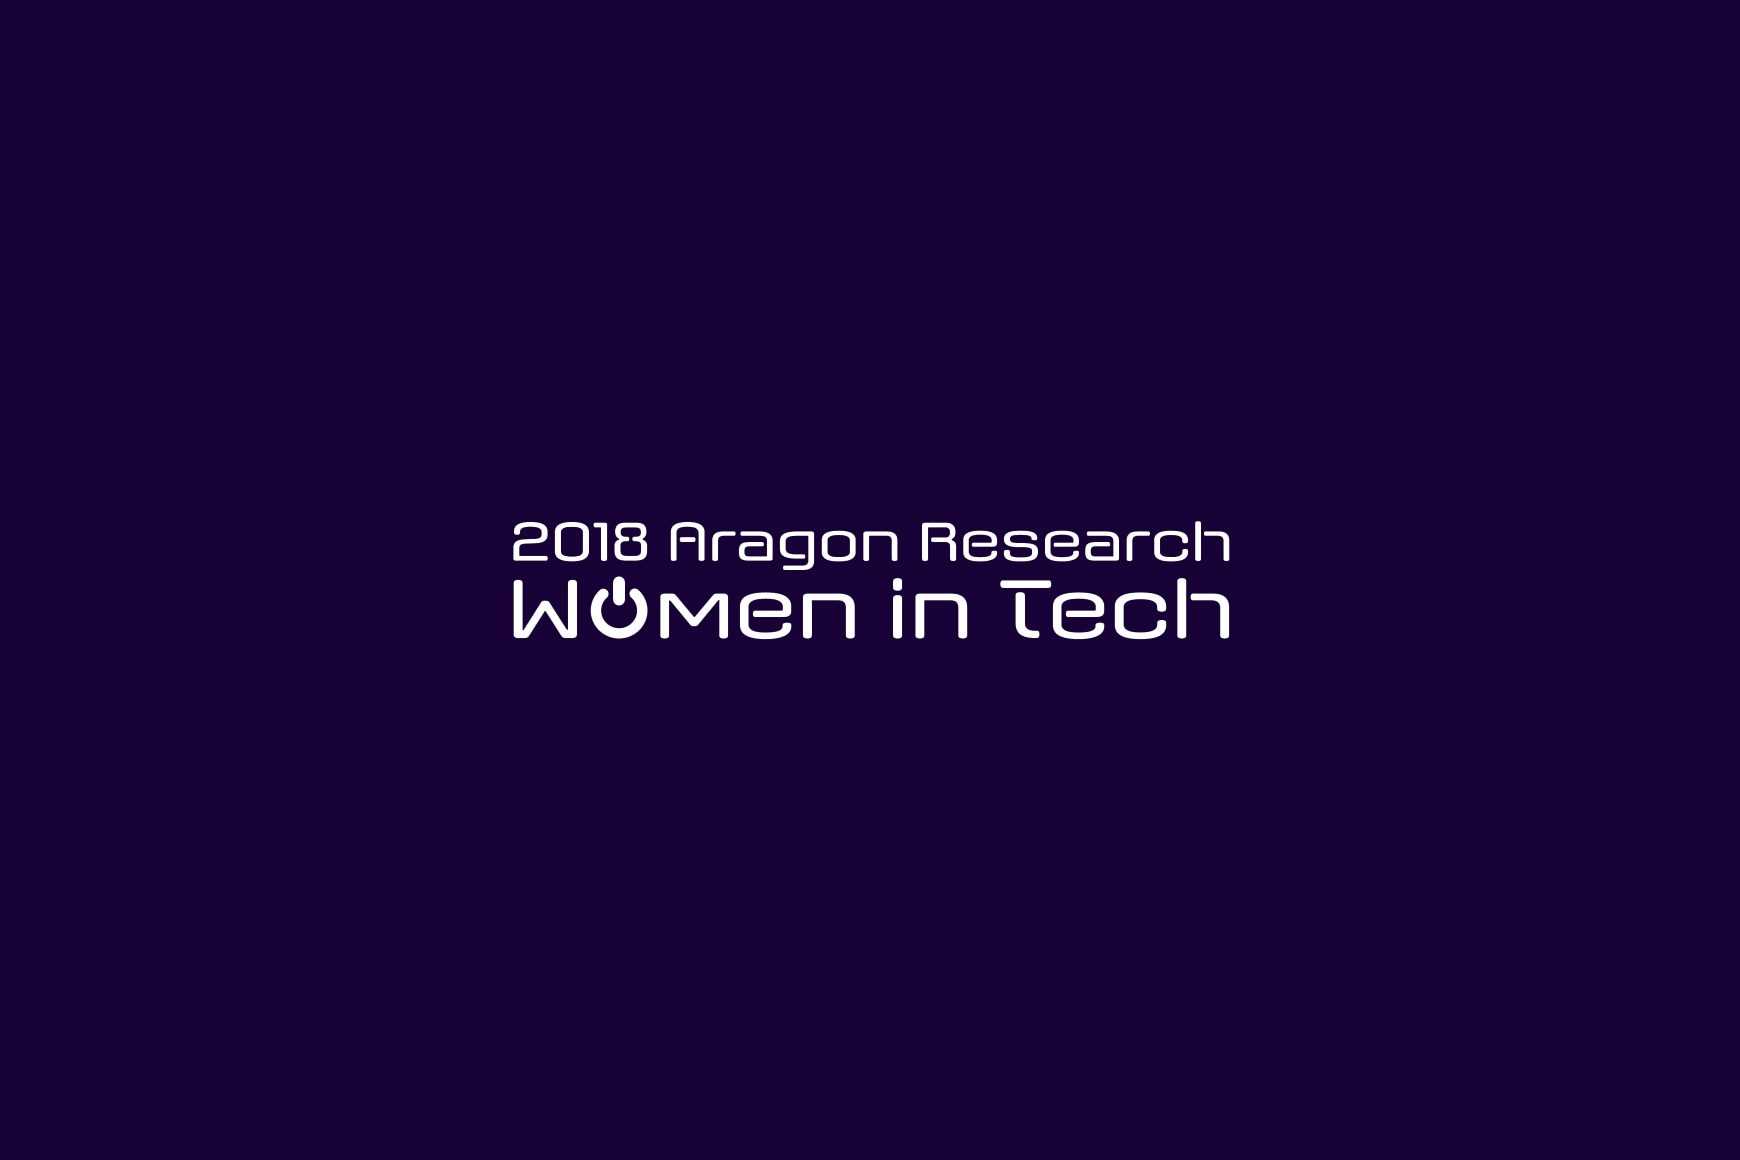 Gillian Heltai of Talkdesk wins 2018 Aragon Research Women in Technology Award for Operations